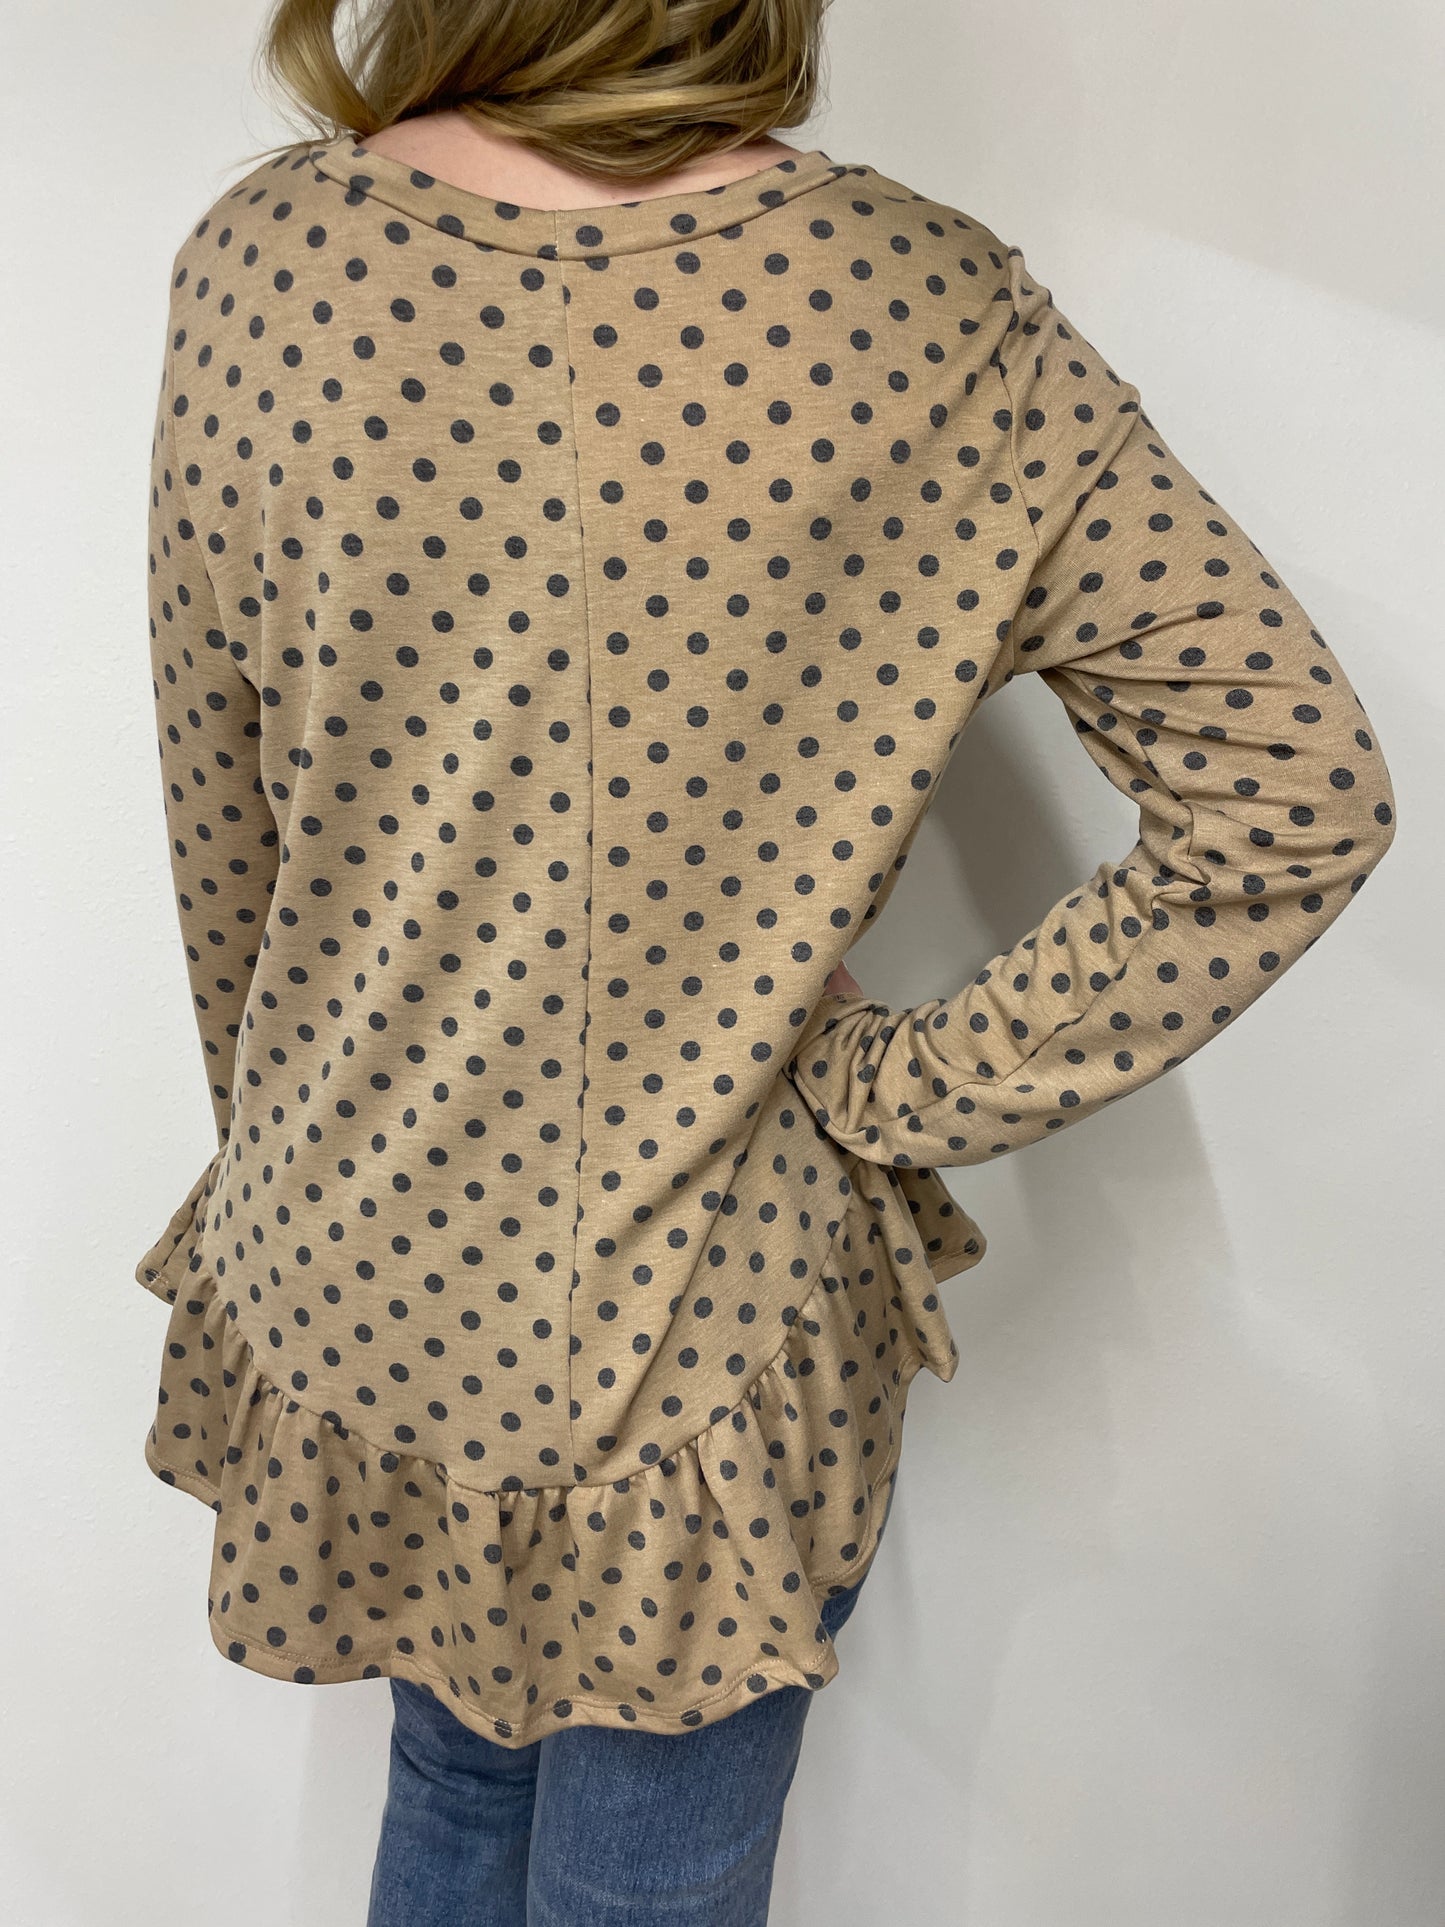 CONNECT THE POLKA DOTS RUFFLE TOP